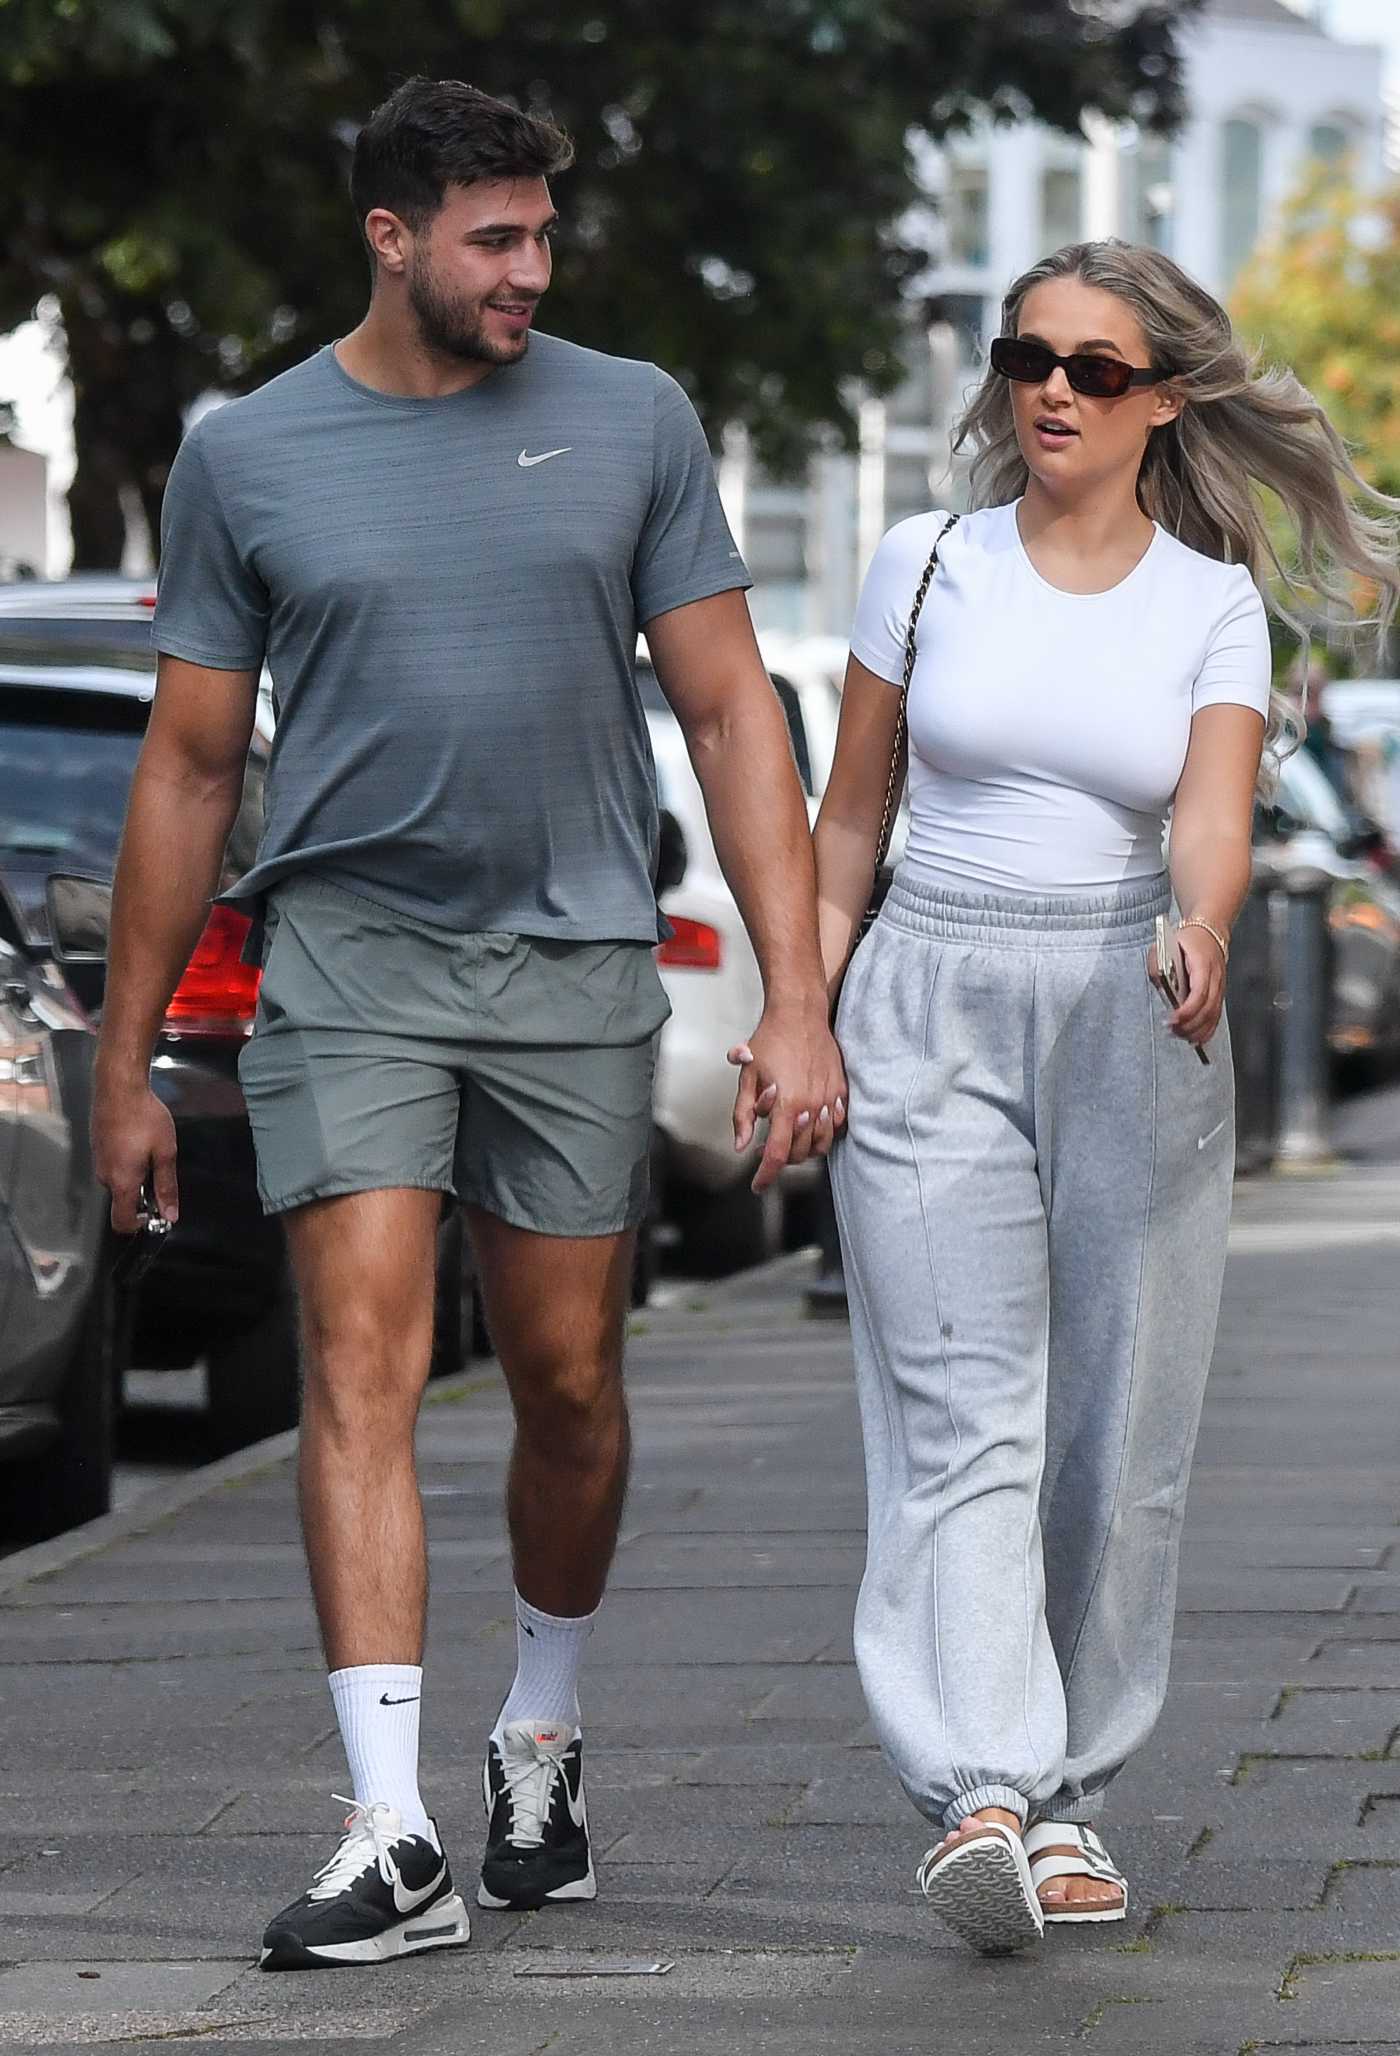 Molly-Mae Hague in a White Tee Was Seen Out with Tommy Fury in Cheshire 07/08/2022